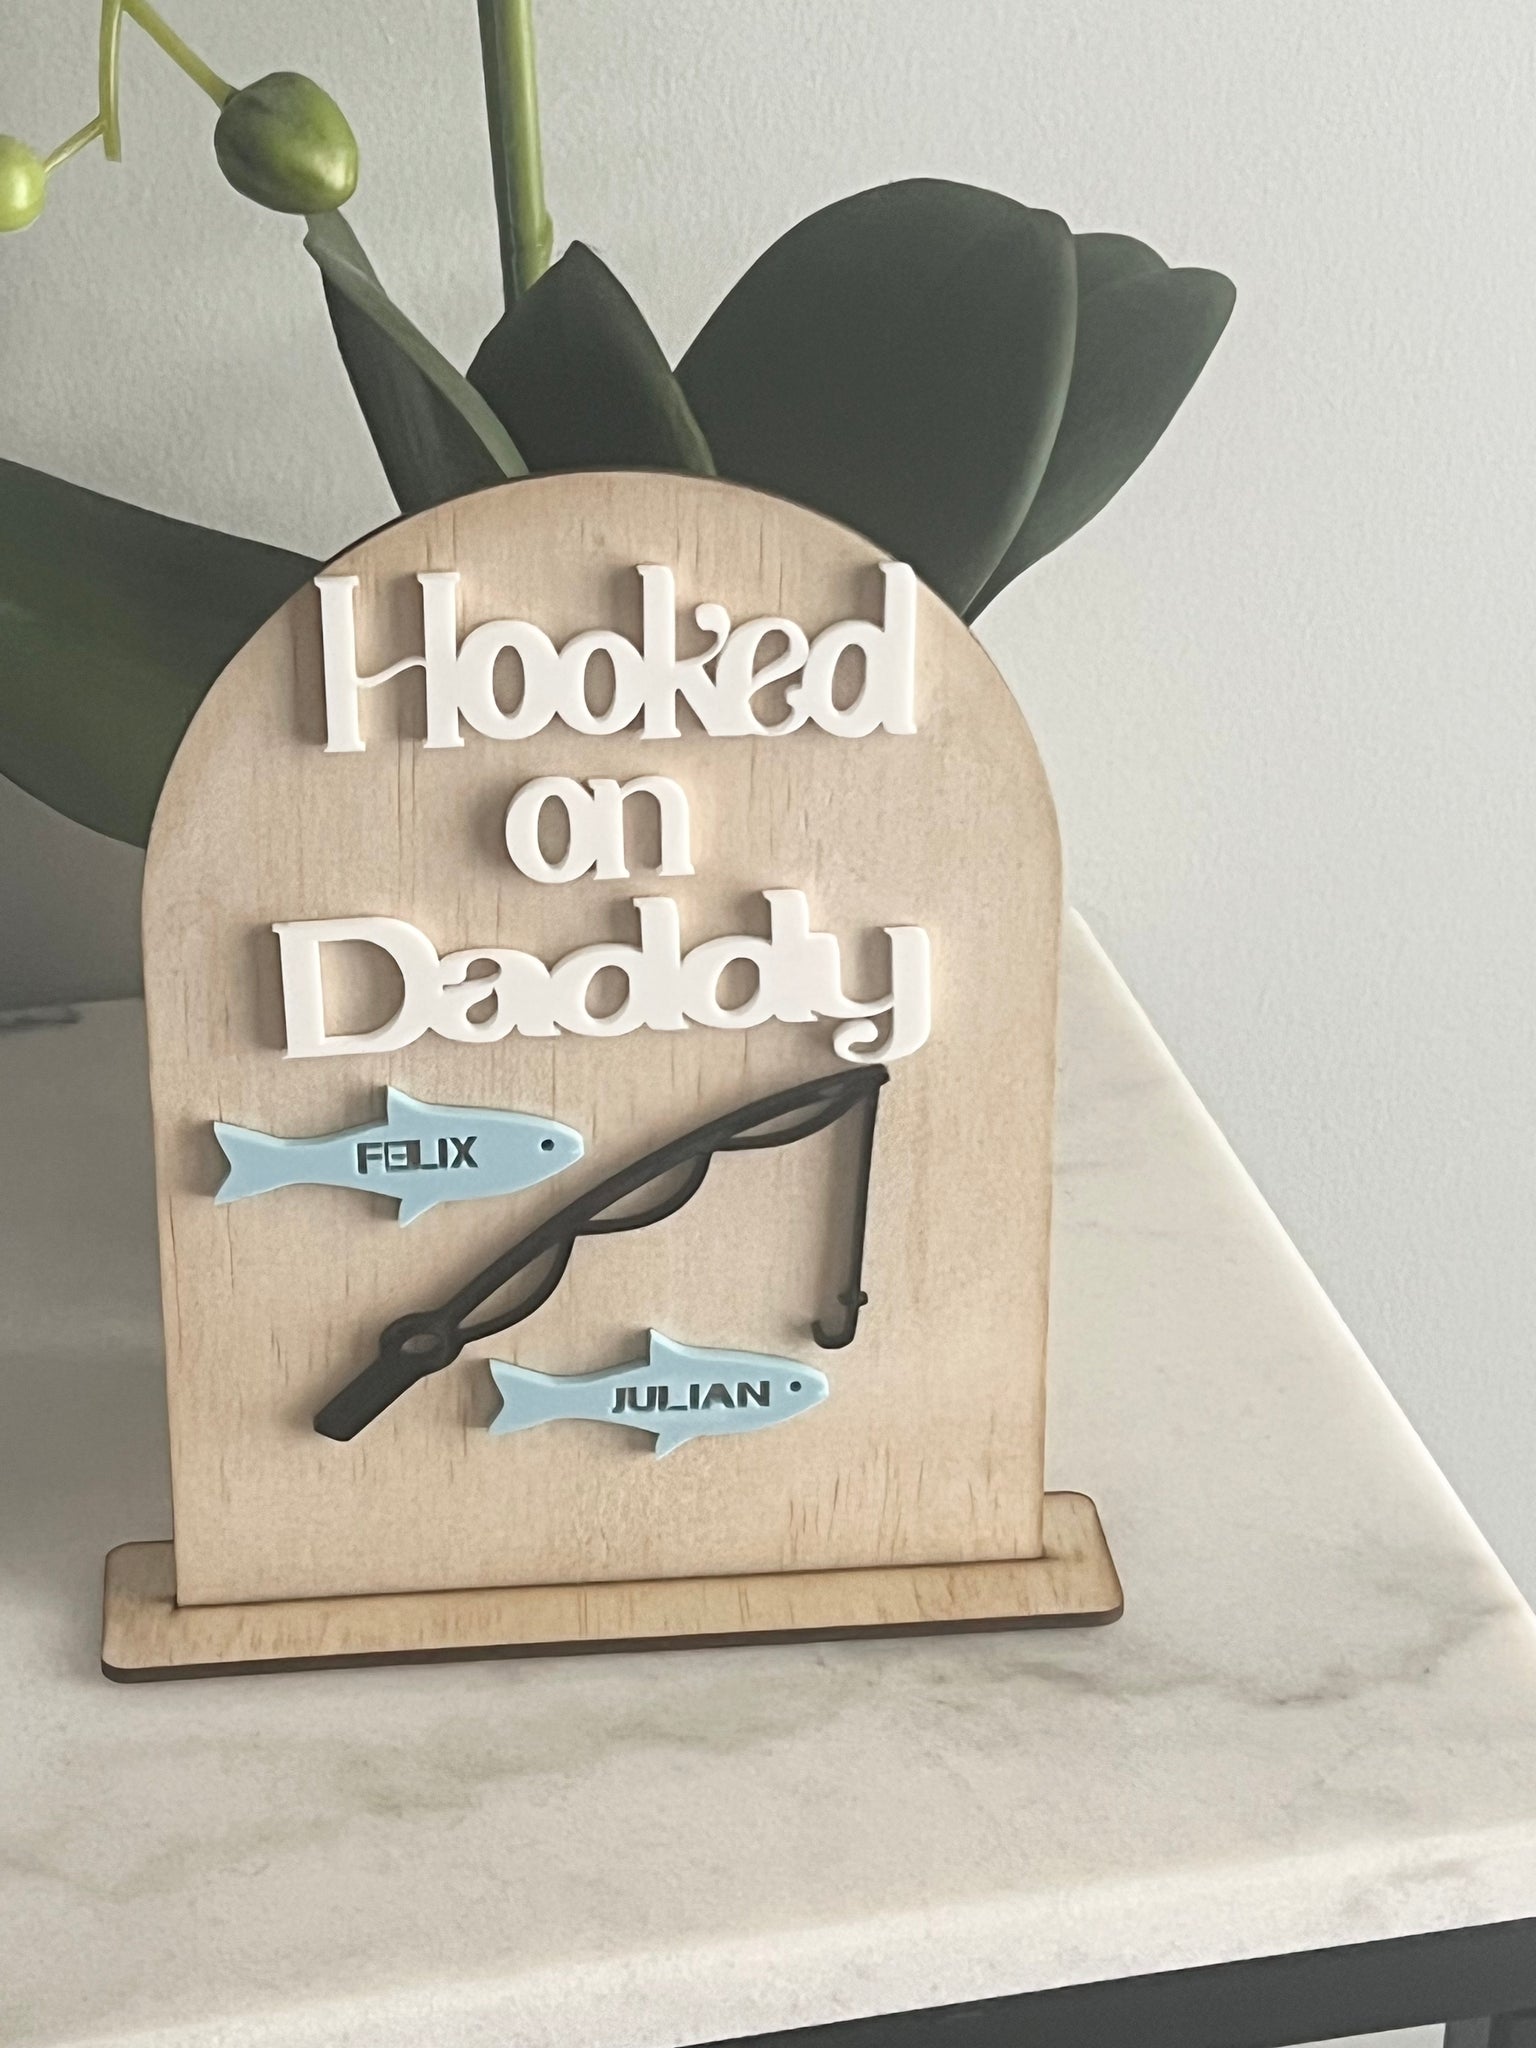 Hooked on daddy plaque